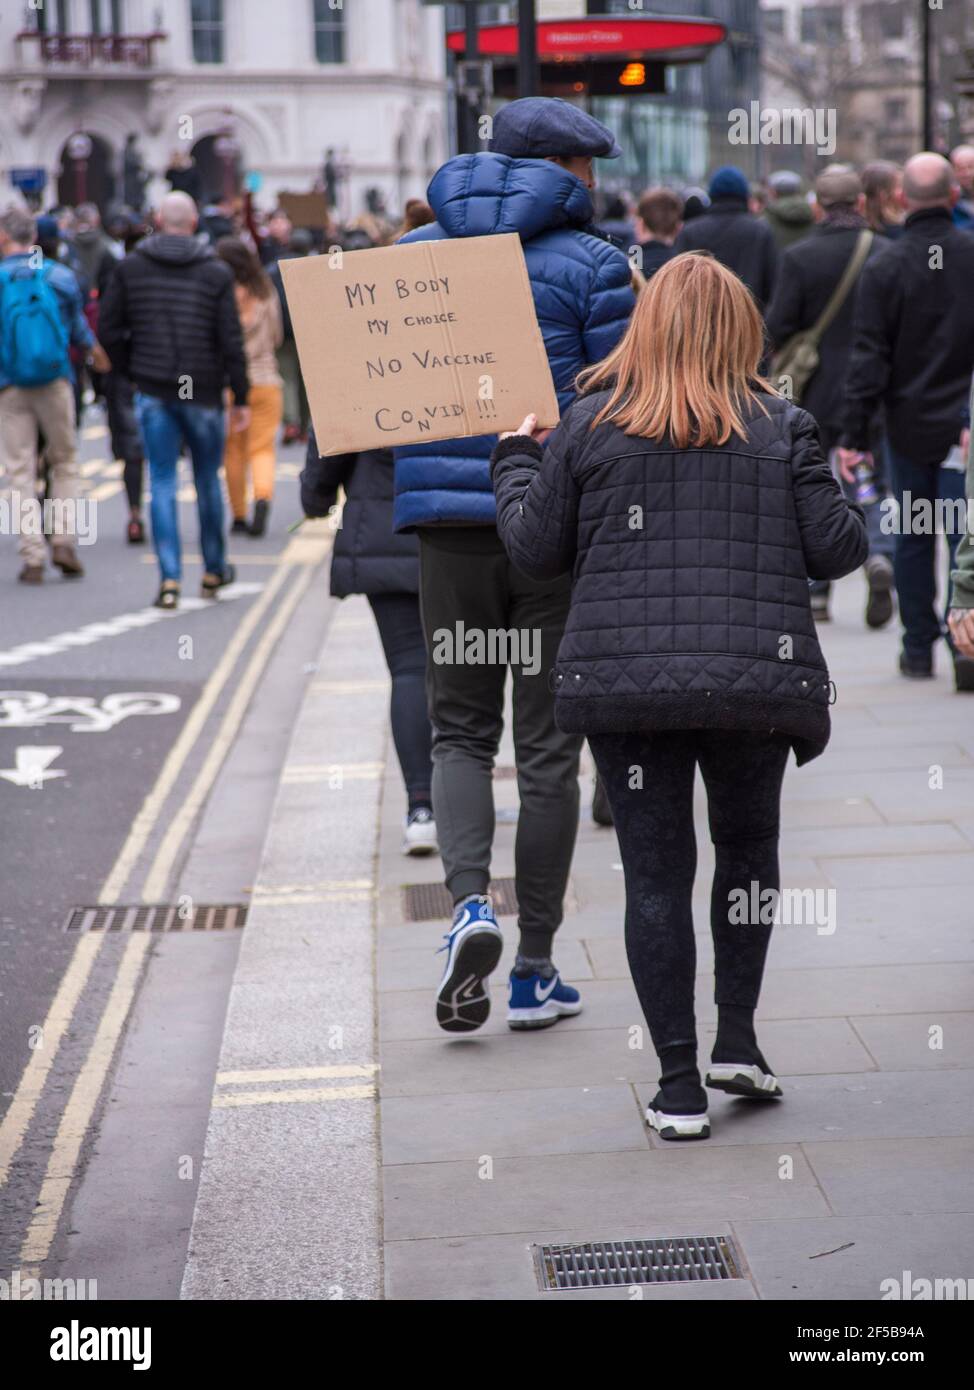 London, 20th March, 2021. Girl protesting at the Anti-lockdown protests in London, UK. Credit: Kevin Seivwright/Alamy Live News. Stock Photo